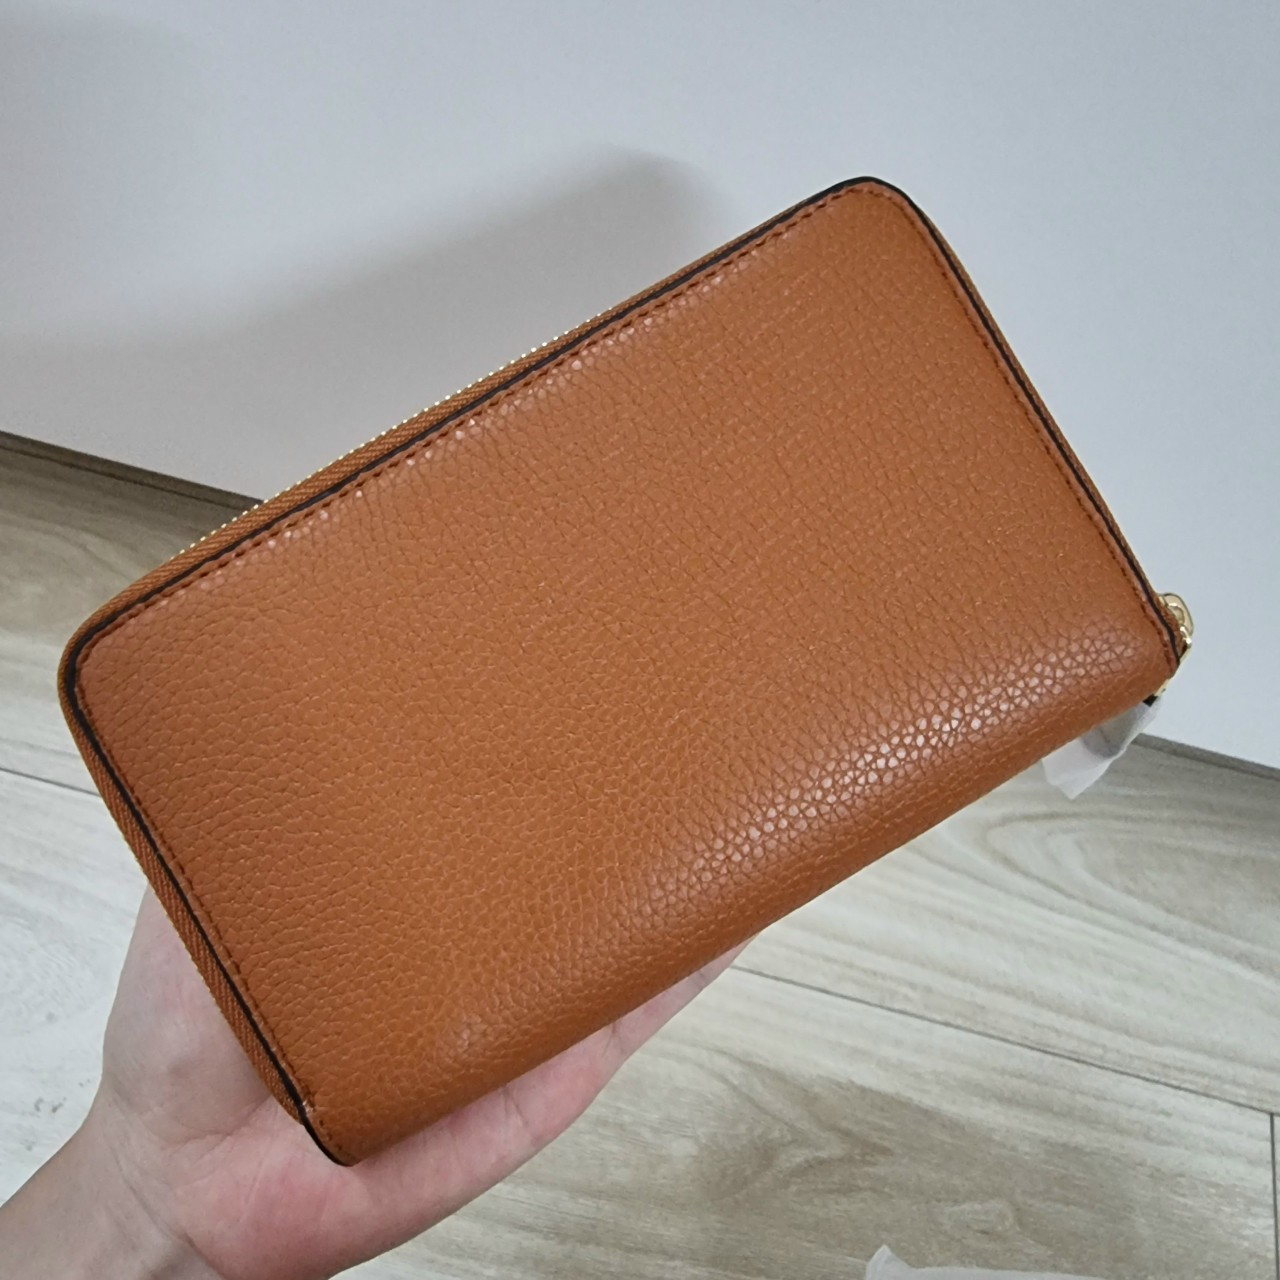 VÍ DÀI BROWN COACH MEDIUM ID ZIP WALLET WITH DIARY EMBROIDERY 4